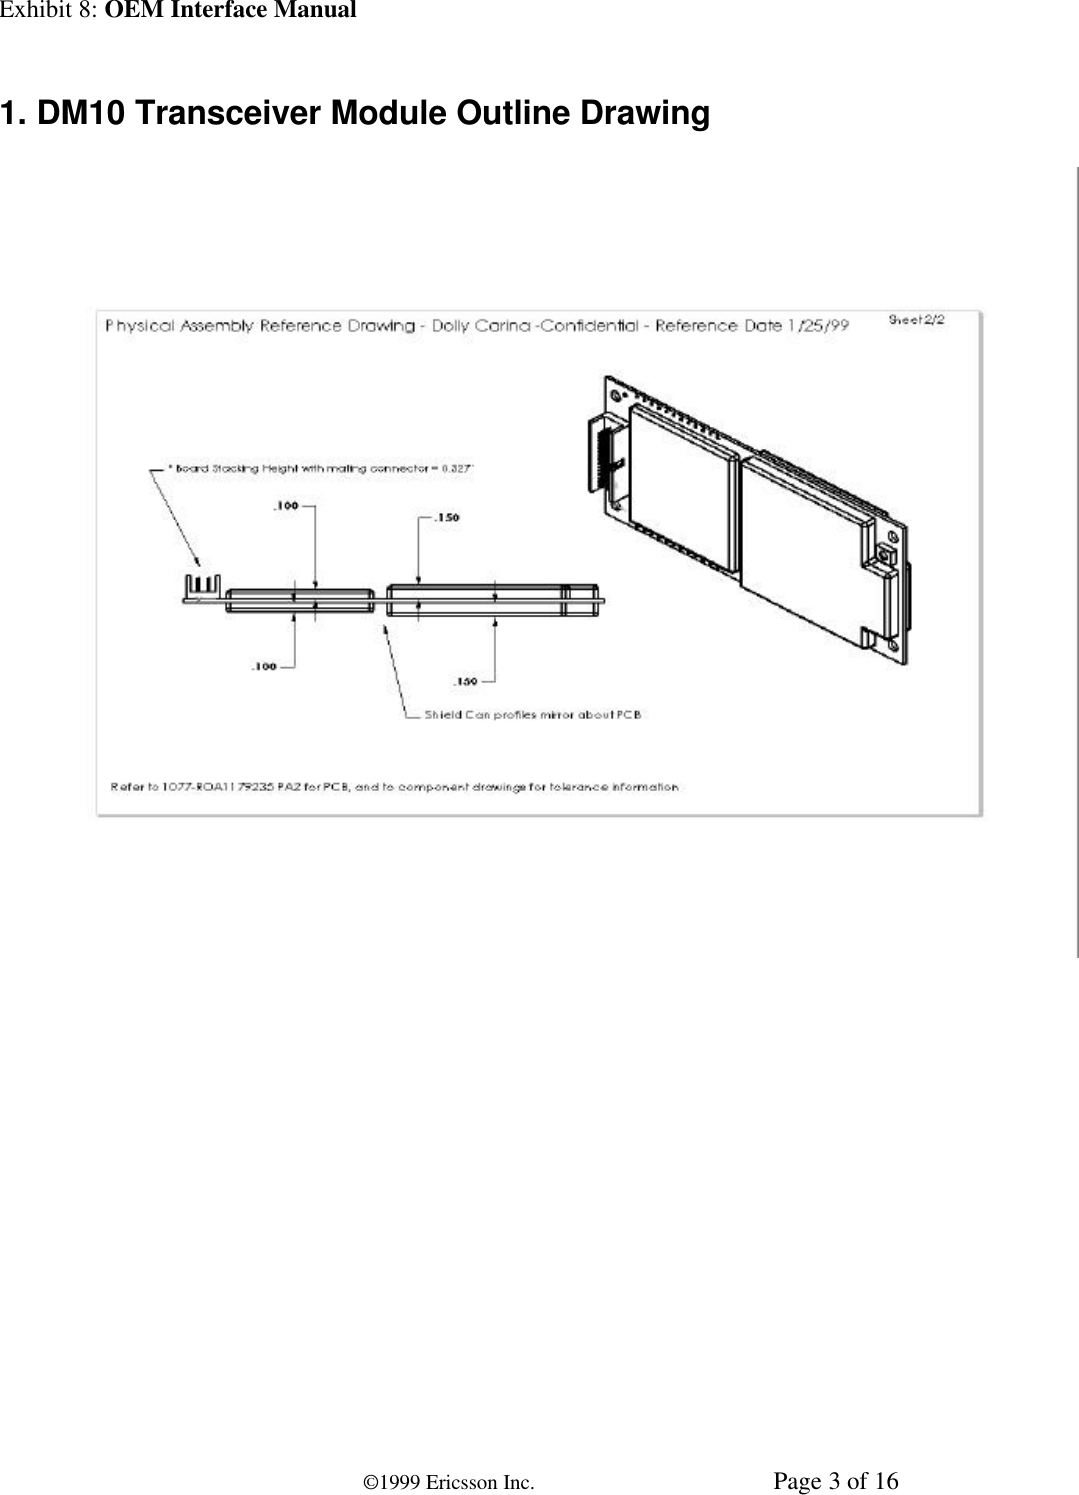 Exhibit 8: OEM Interface Manual©1999 Ericsson Inc. Page 3 of 161. DM10 Transceiver Module Outline Drawing